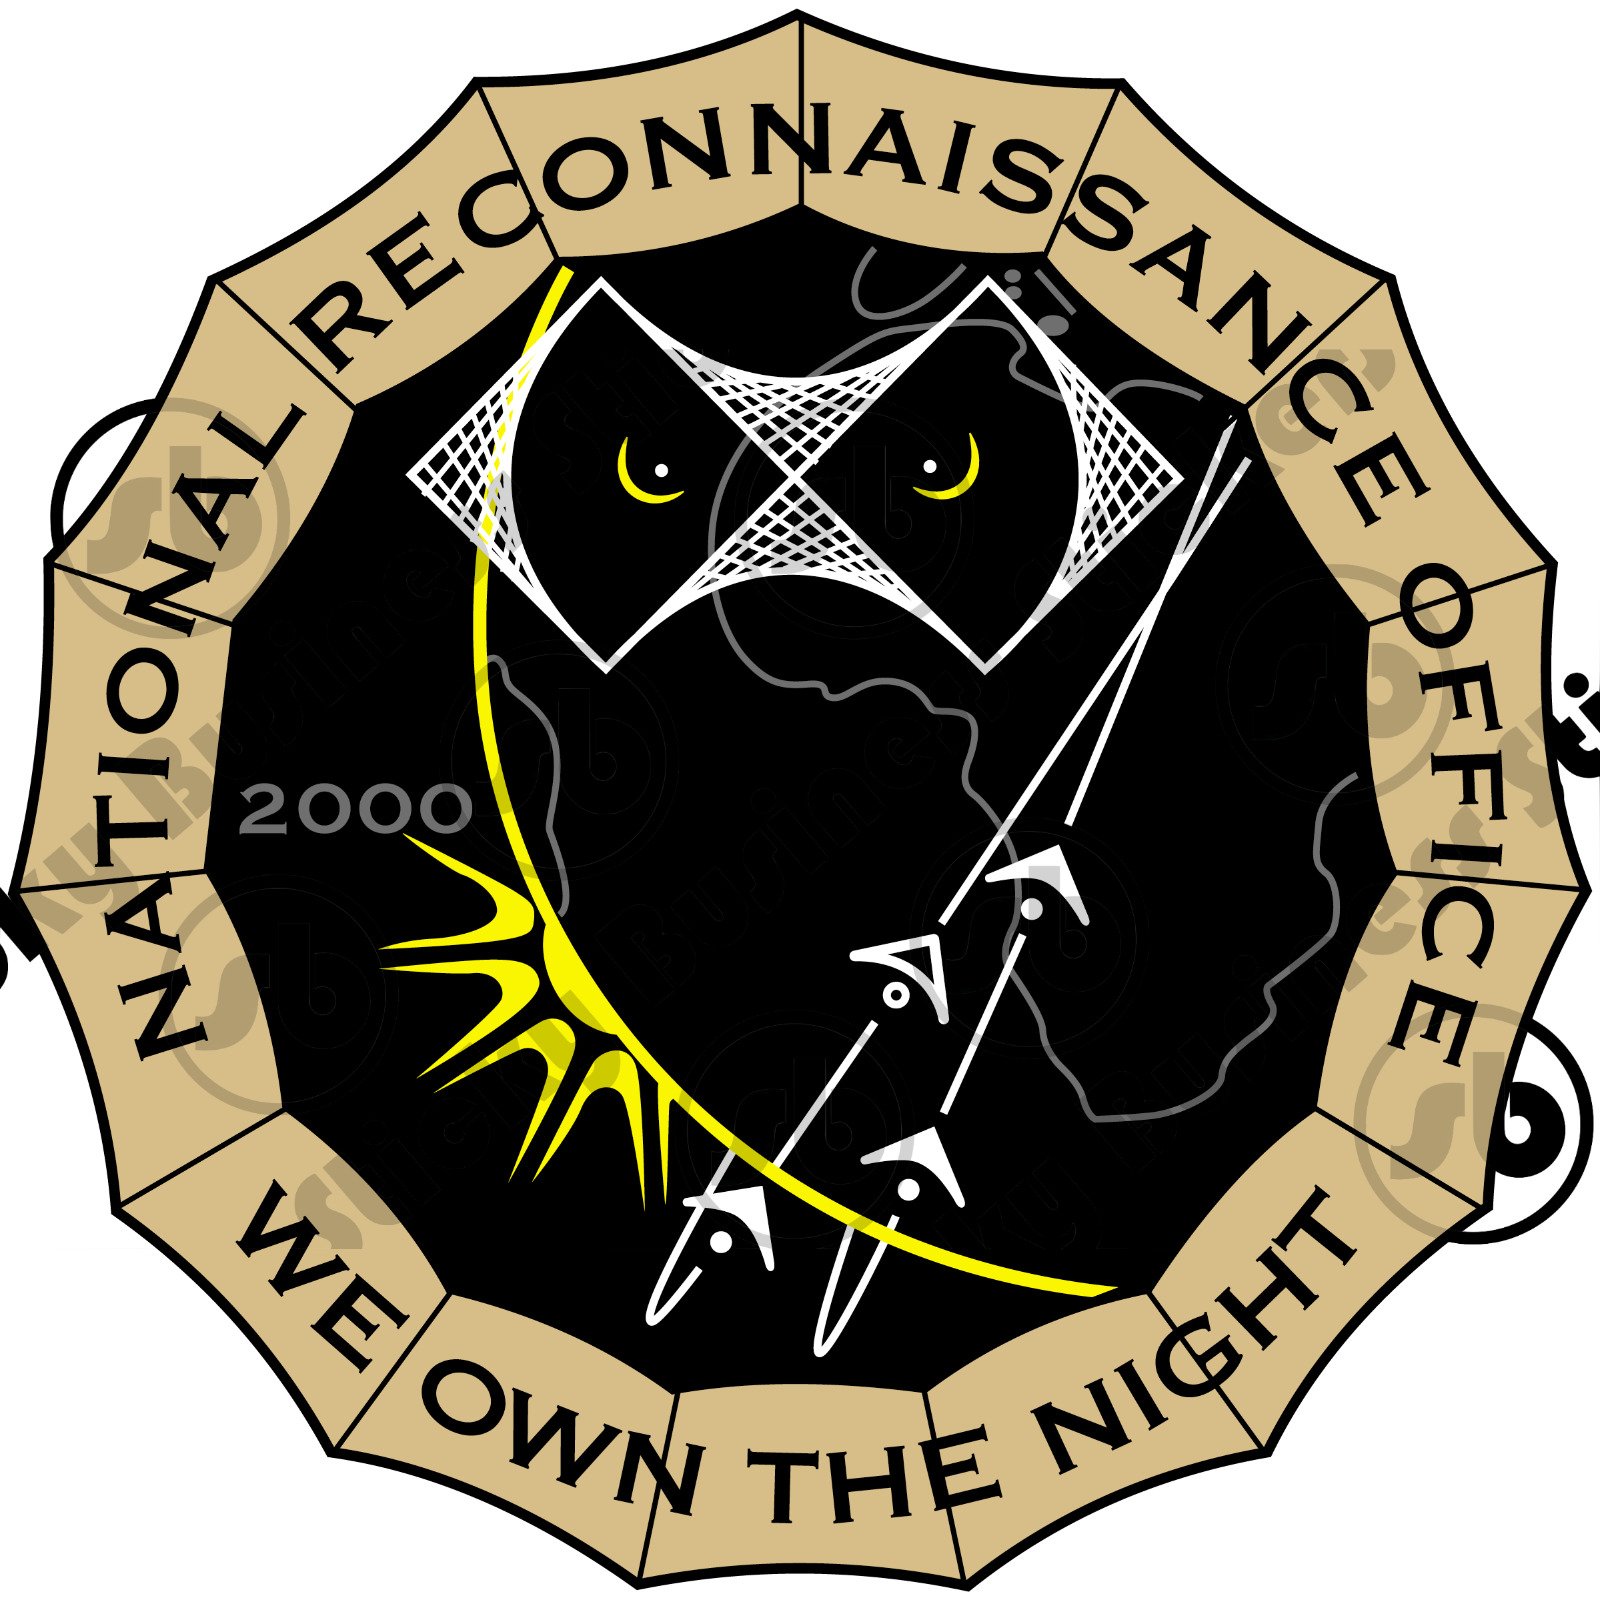 Top Secret NRO Patch Sticker & Magnet We Own The Night Spy Skunk Works CIA NSA